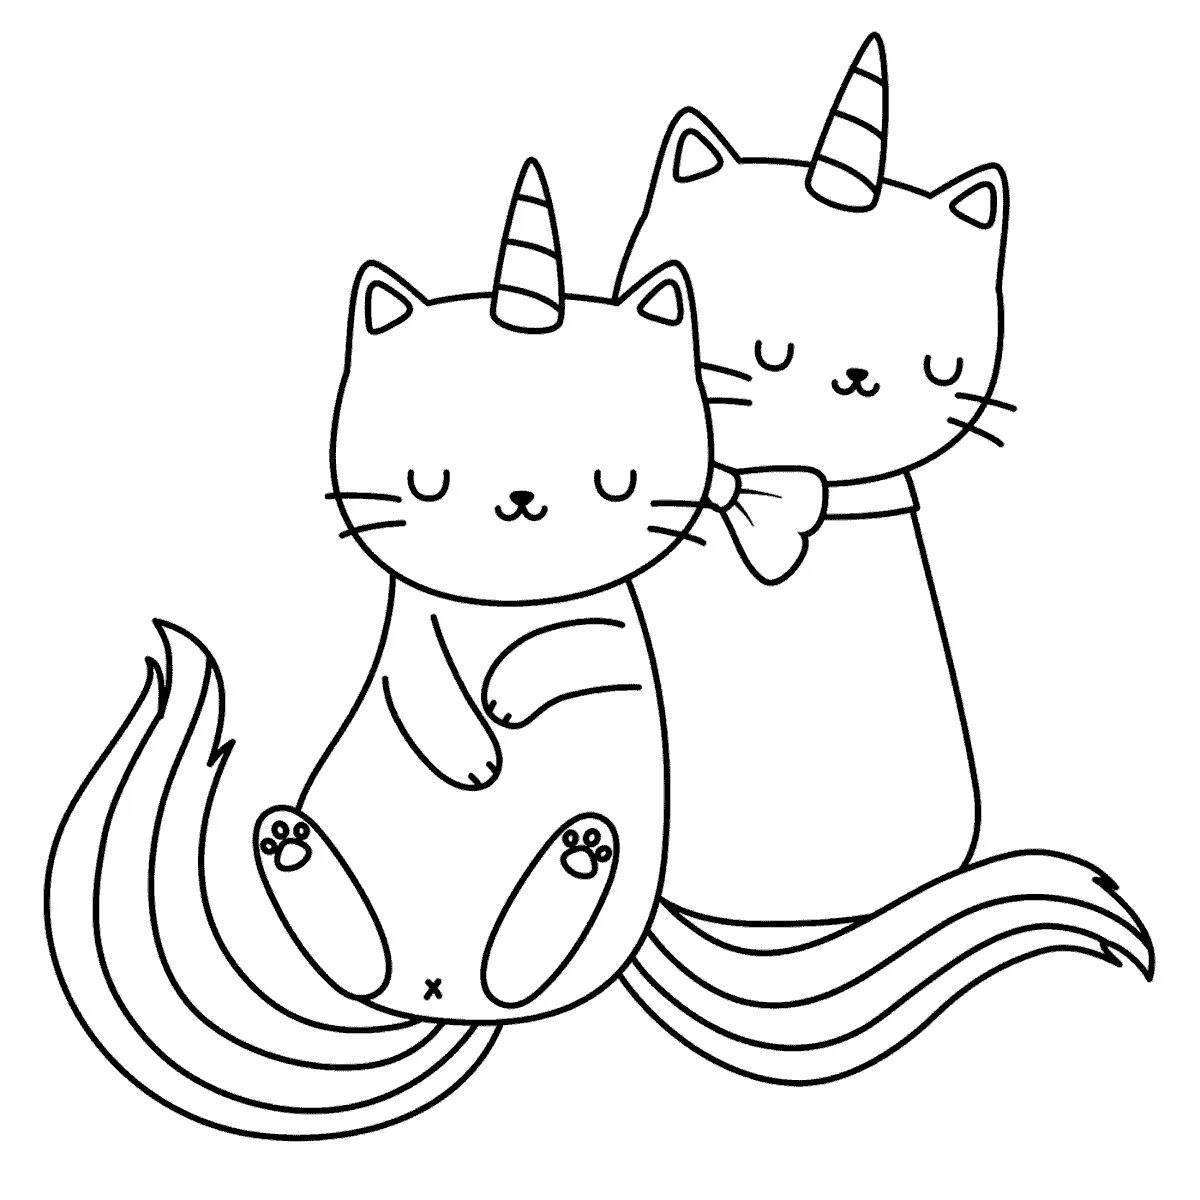 Violent rainbow kitten coloring page